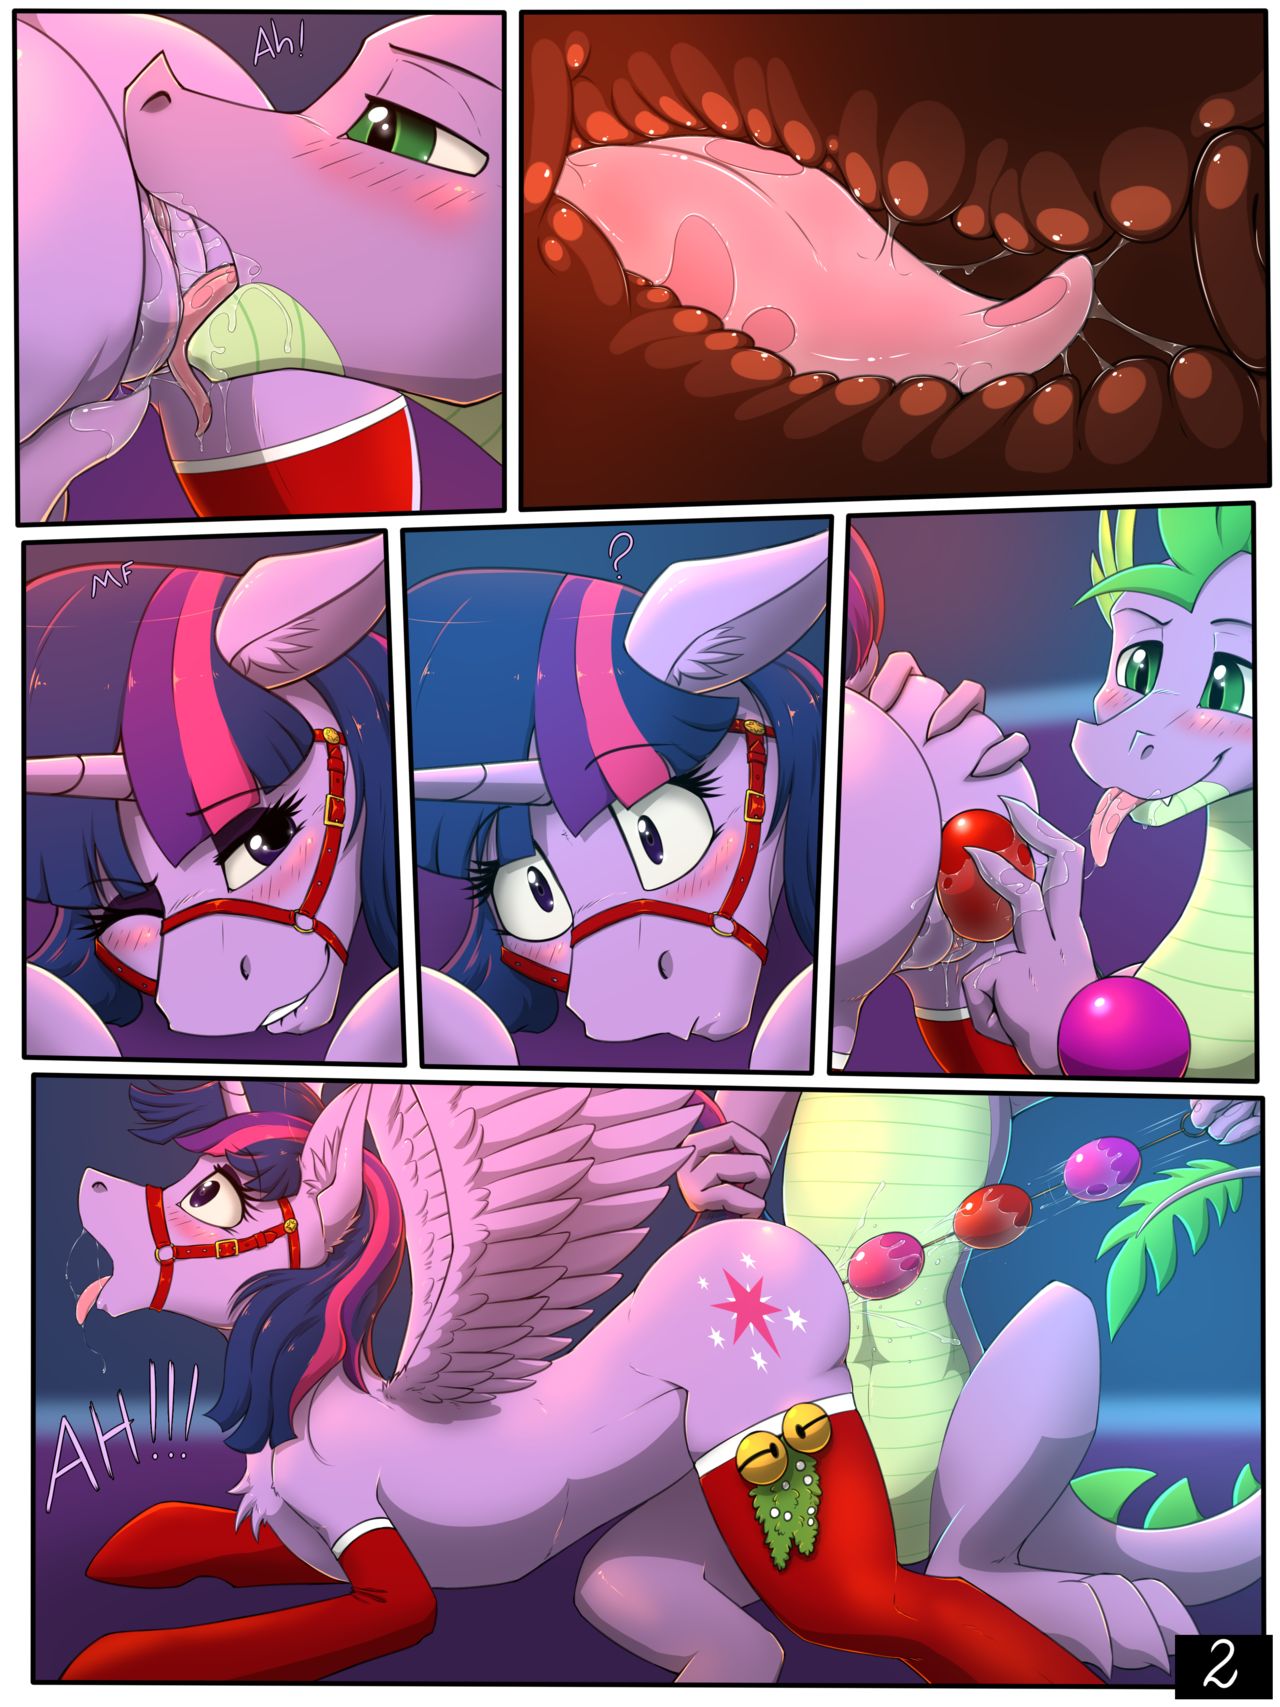 [Twotail813] Present For Spike (My Little Pony Friendship Is Magic)【xyzf个人汉化】 